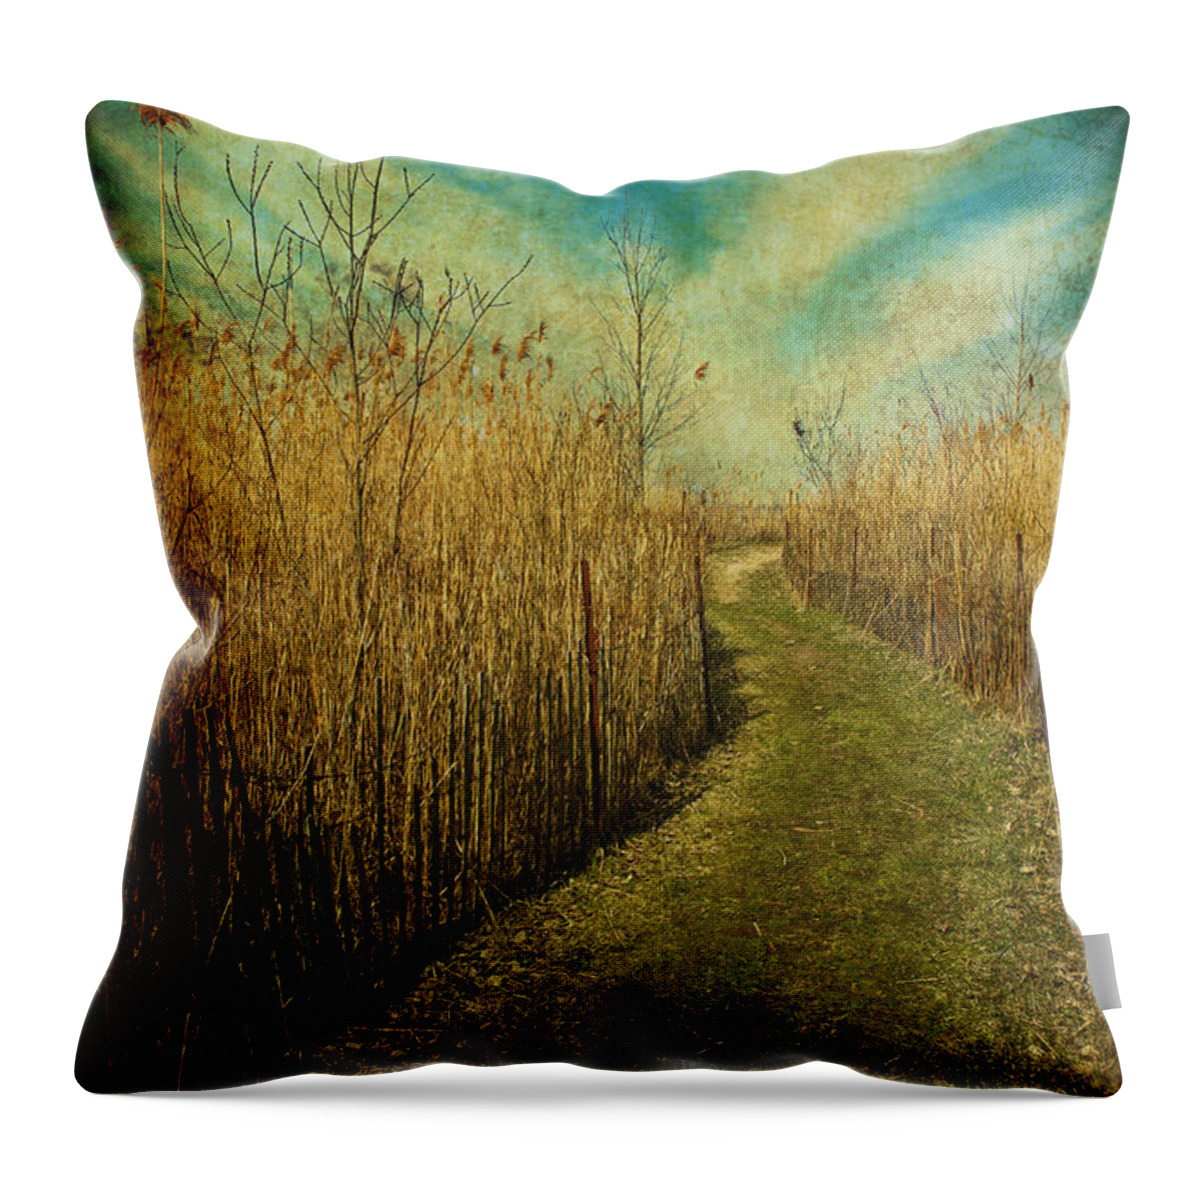 Festblues Throw Pillow featuring the photograph Golden Summer Days... by Nina Stavlund